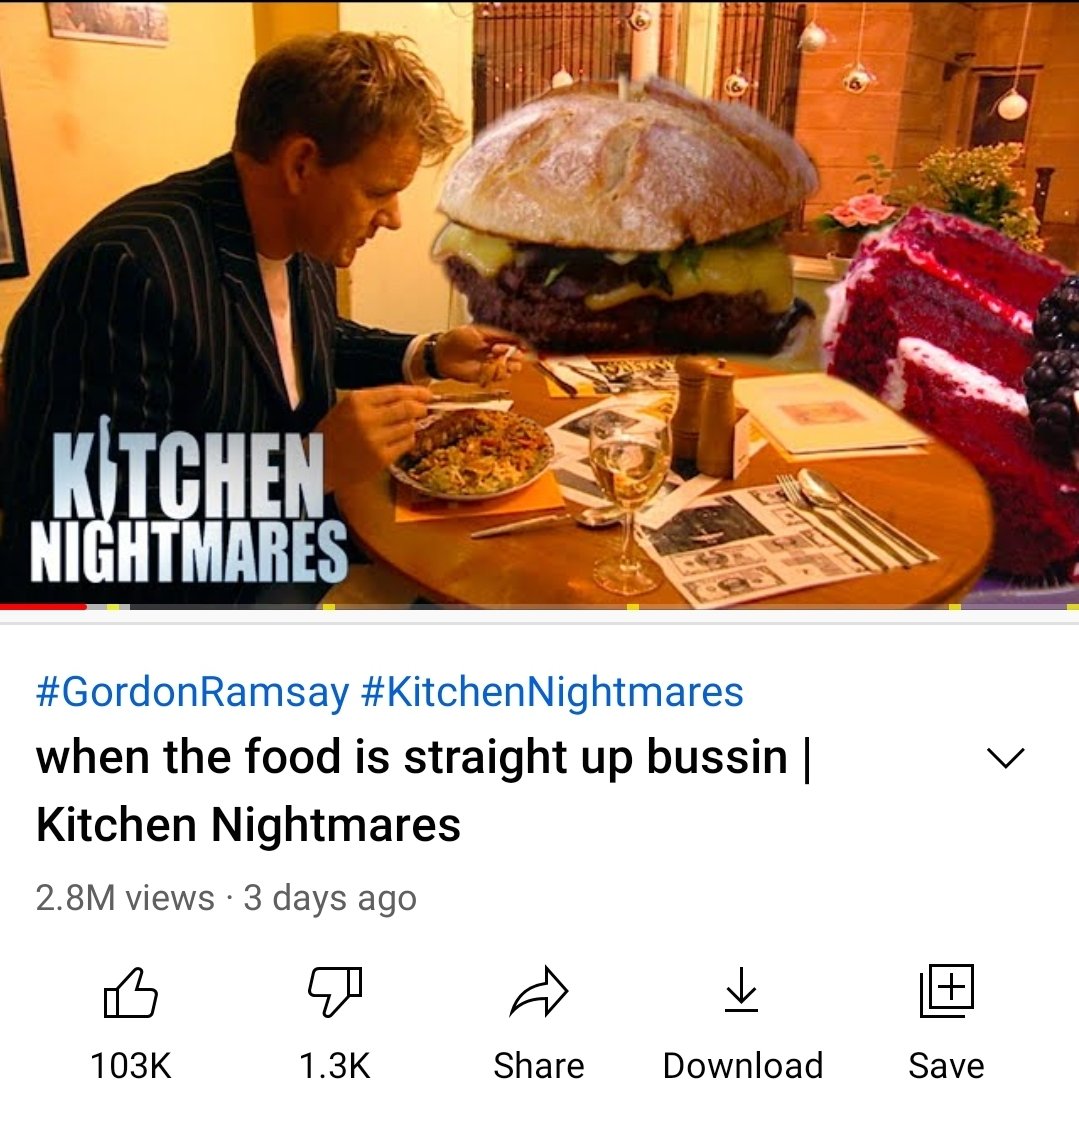 Alright whose cooking made Gordon Ramsay horny? https://t.co/i9yv668Nit